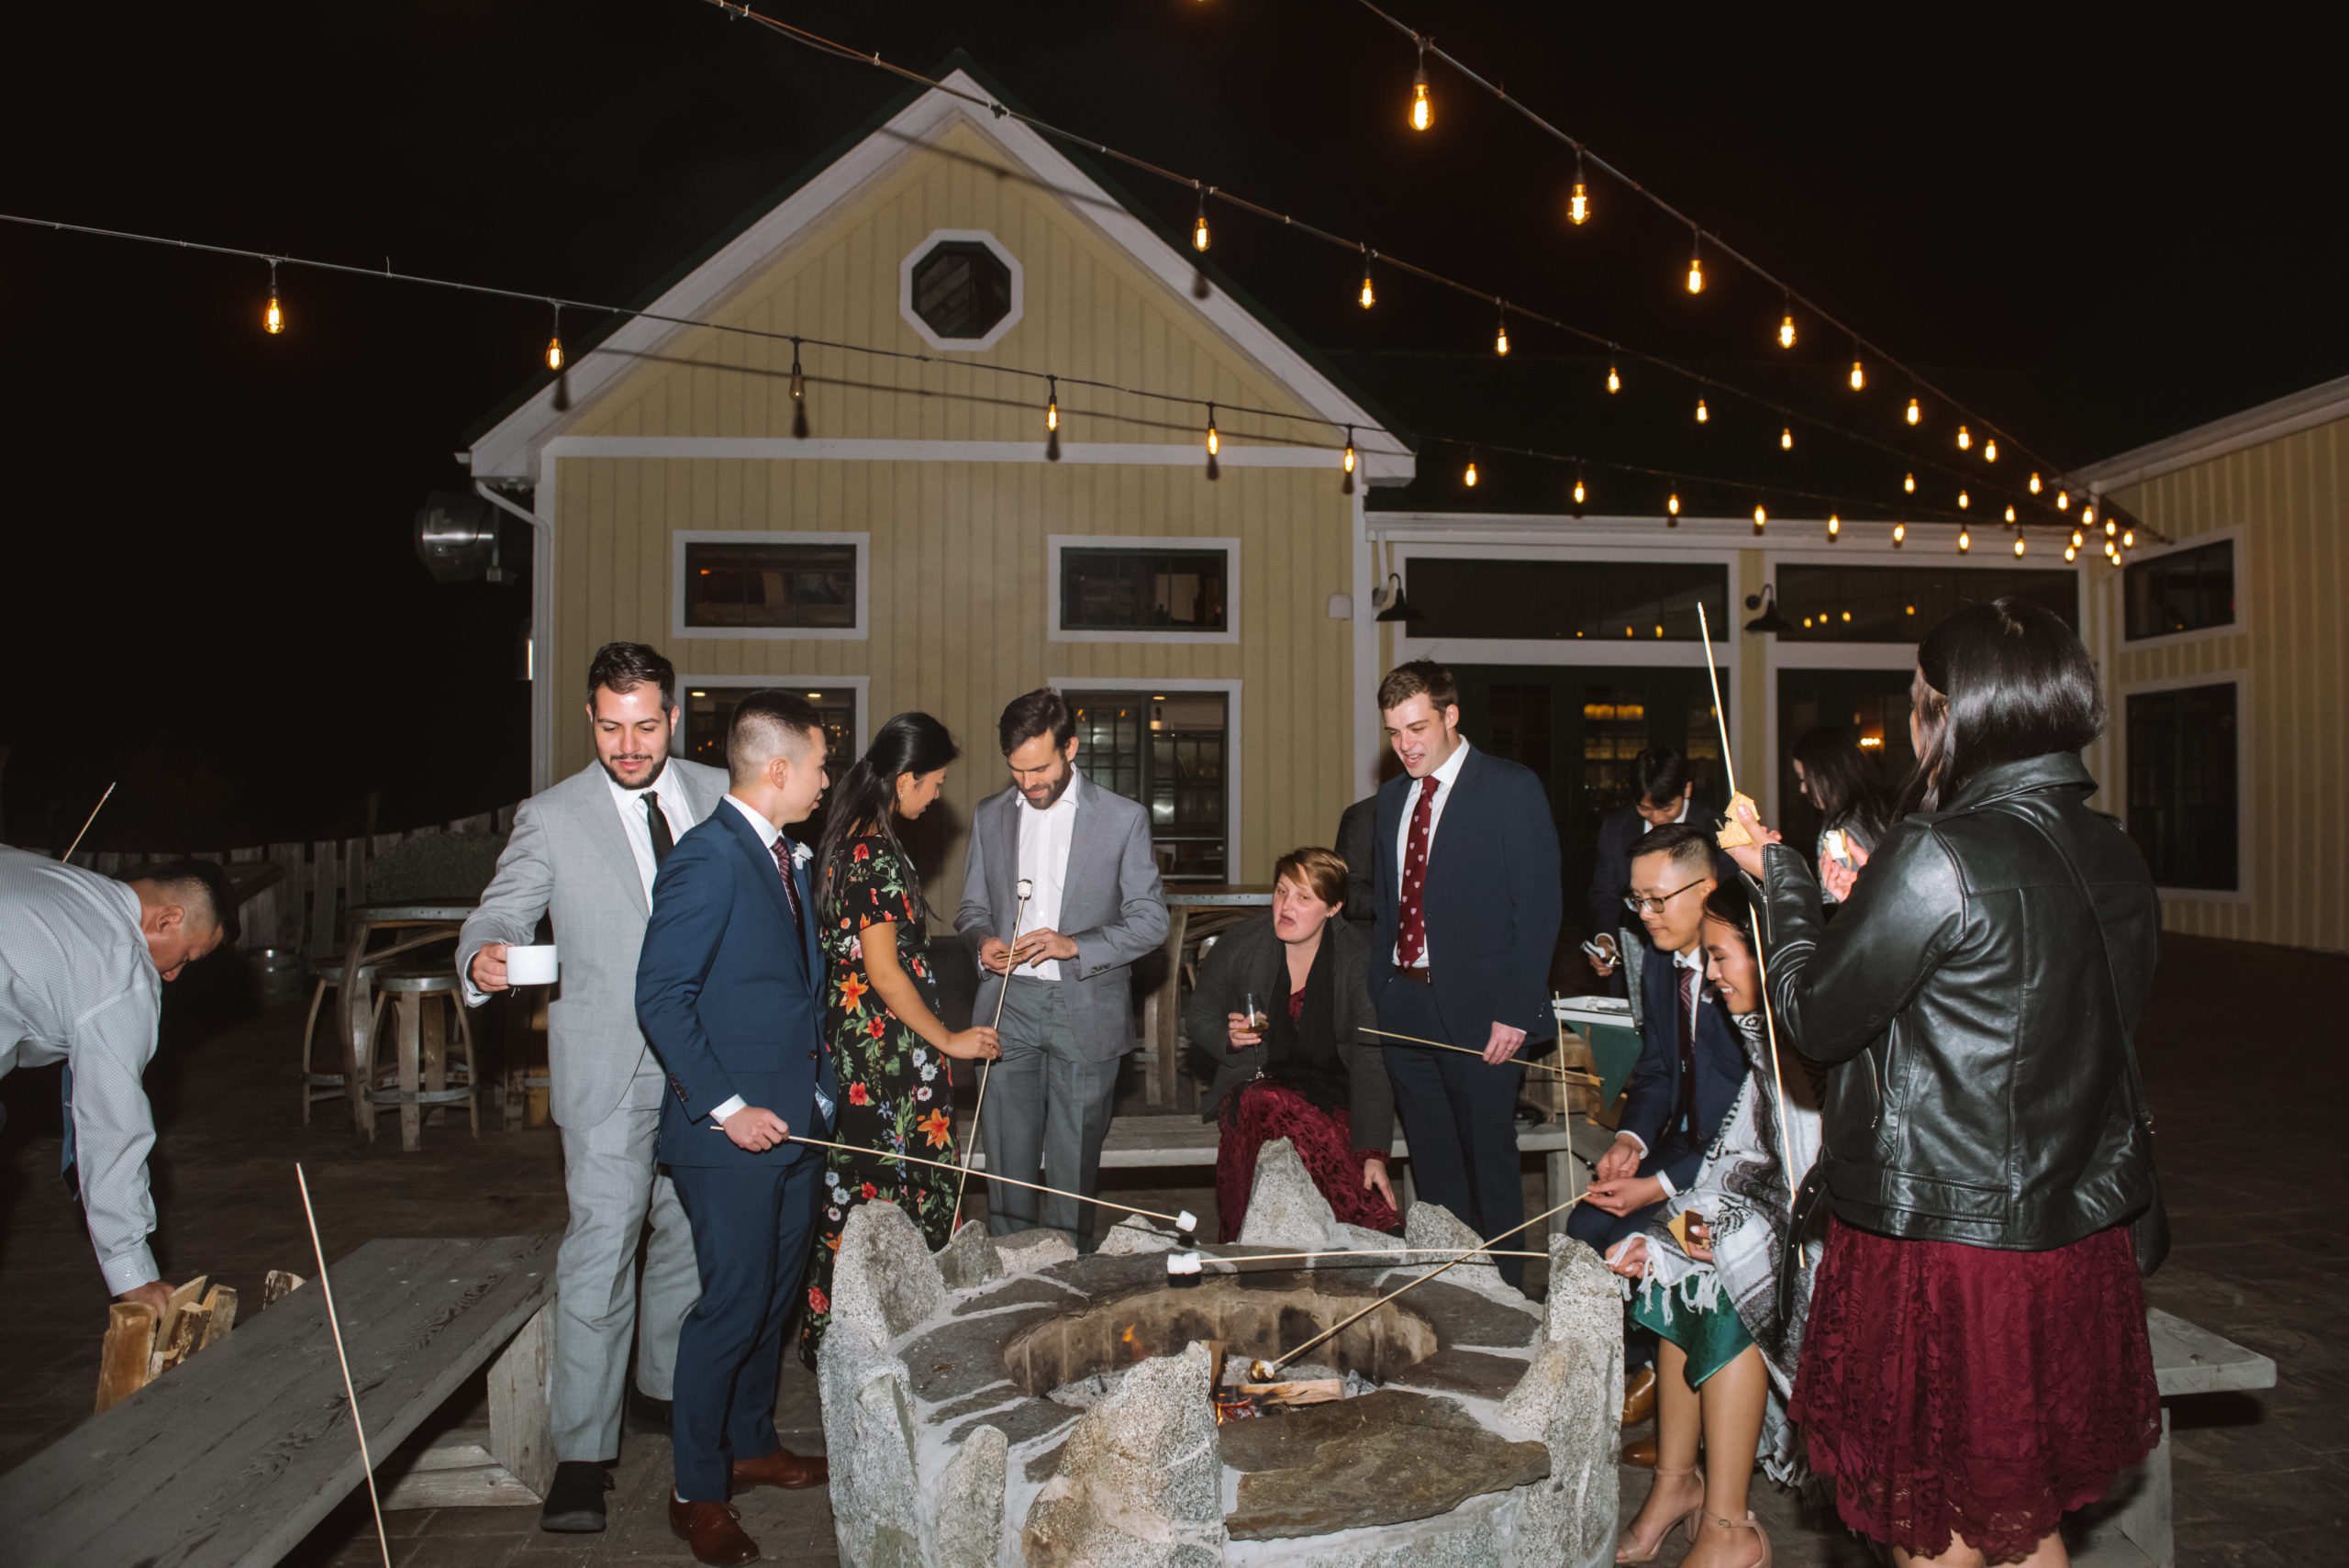 Wedding guests and the two grooms huddled around a bonfire roasting marshmallows for their s'mores. They are all either smiling or in conversation with one another. There are three string light strings hanging above the group.